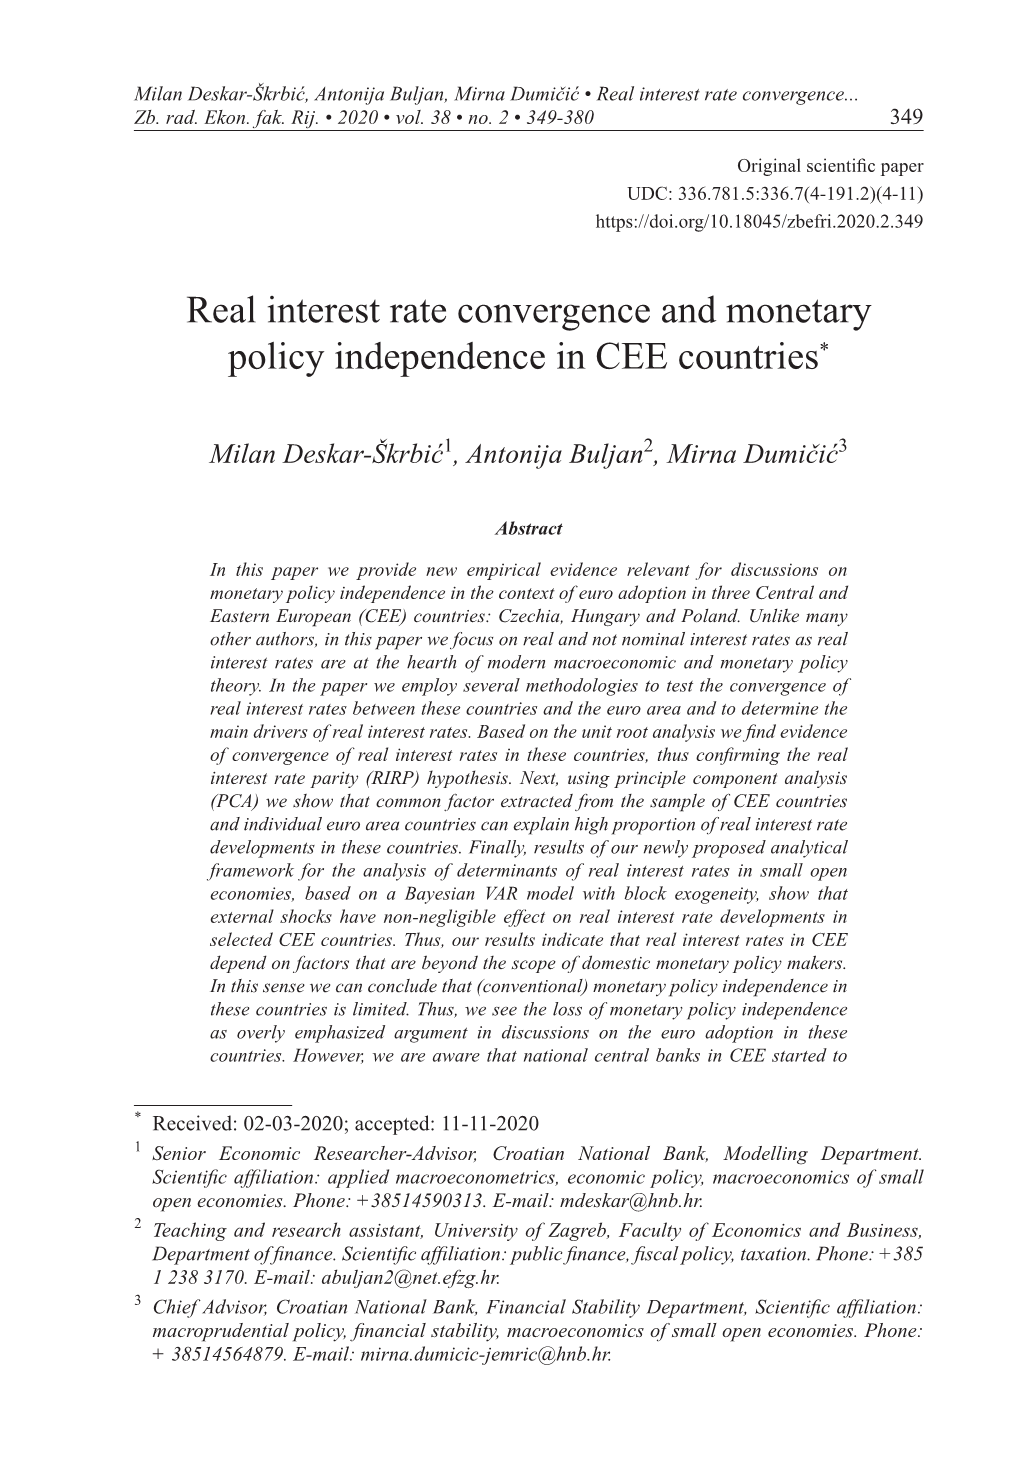 Real Interest Rate Convergence and Monetary Policy Independence in CEE Countries*